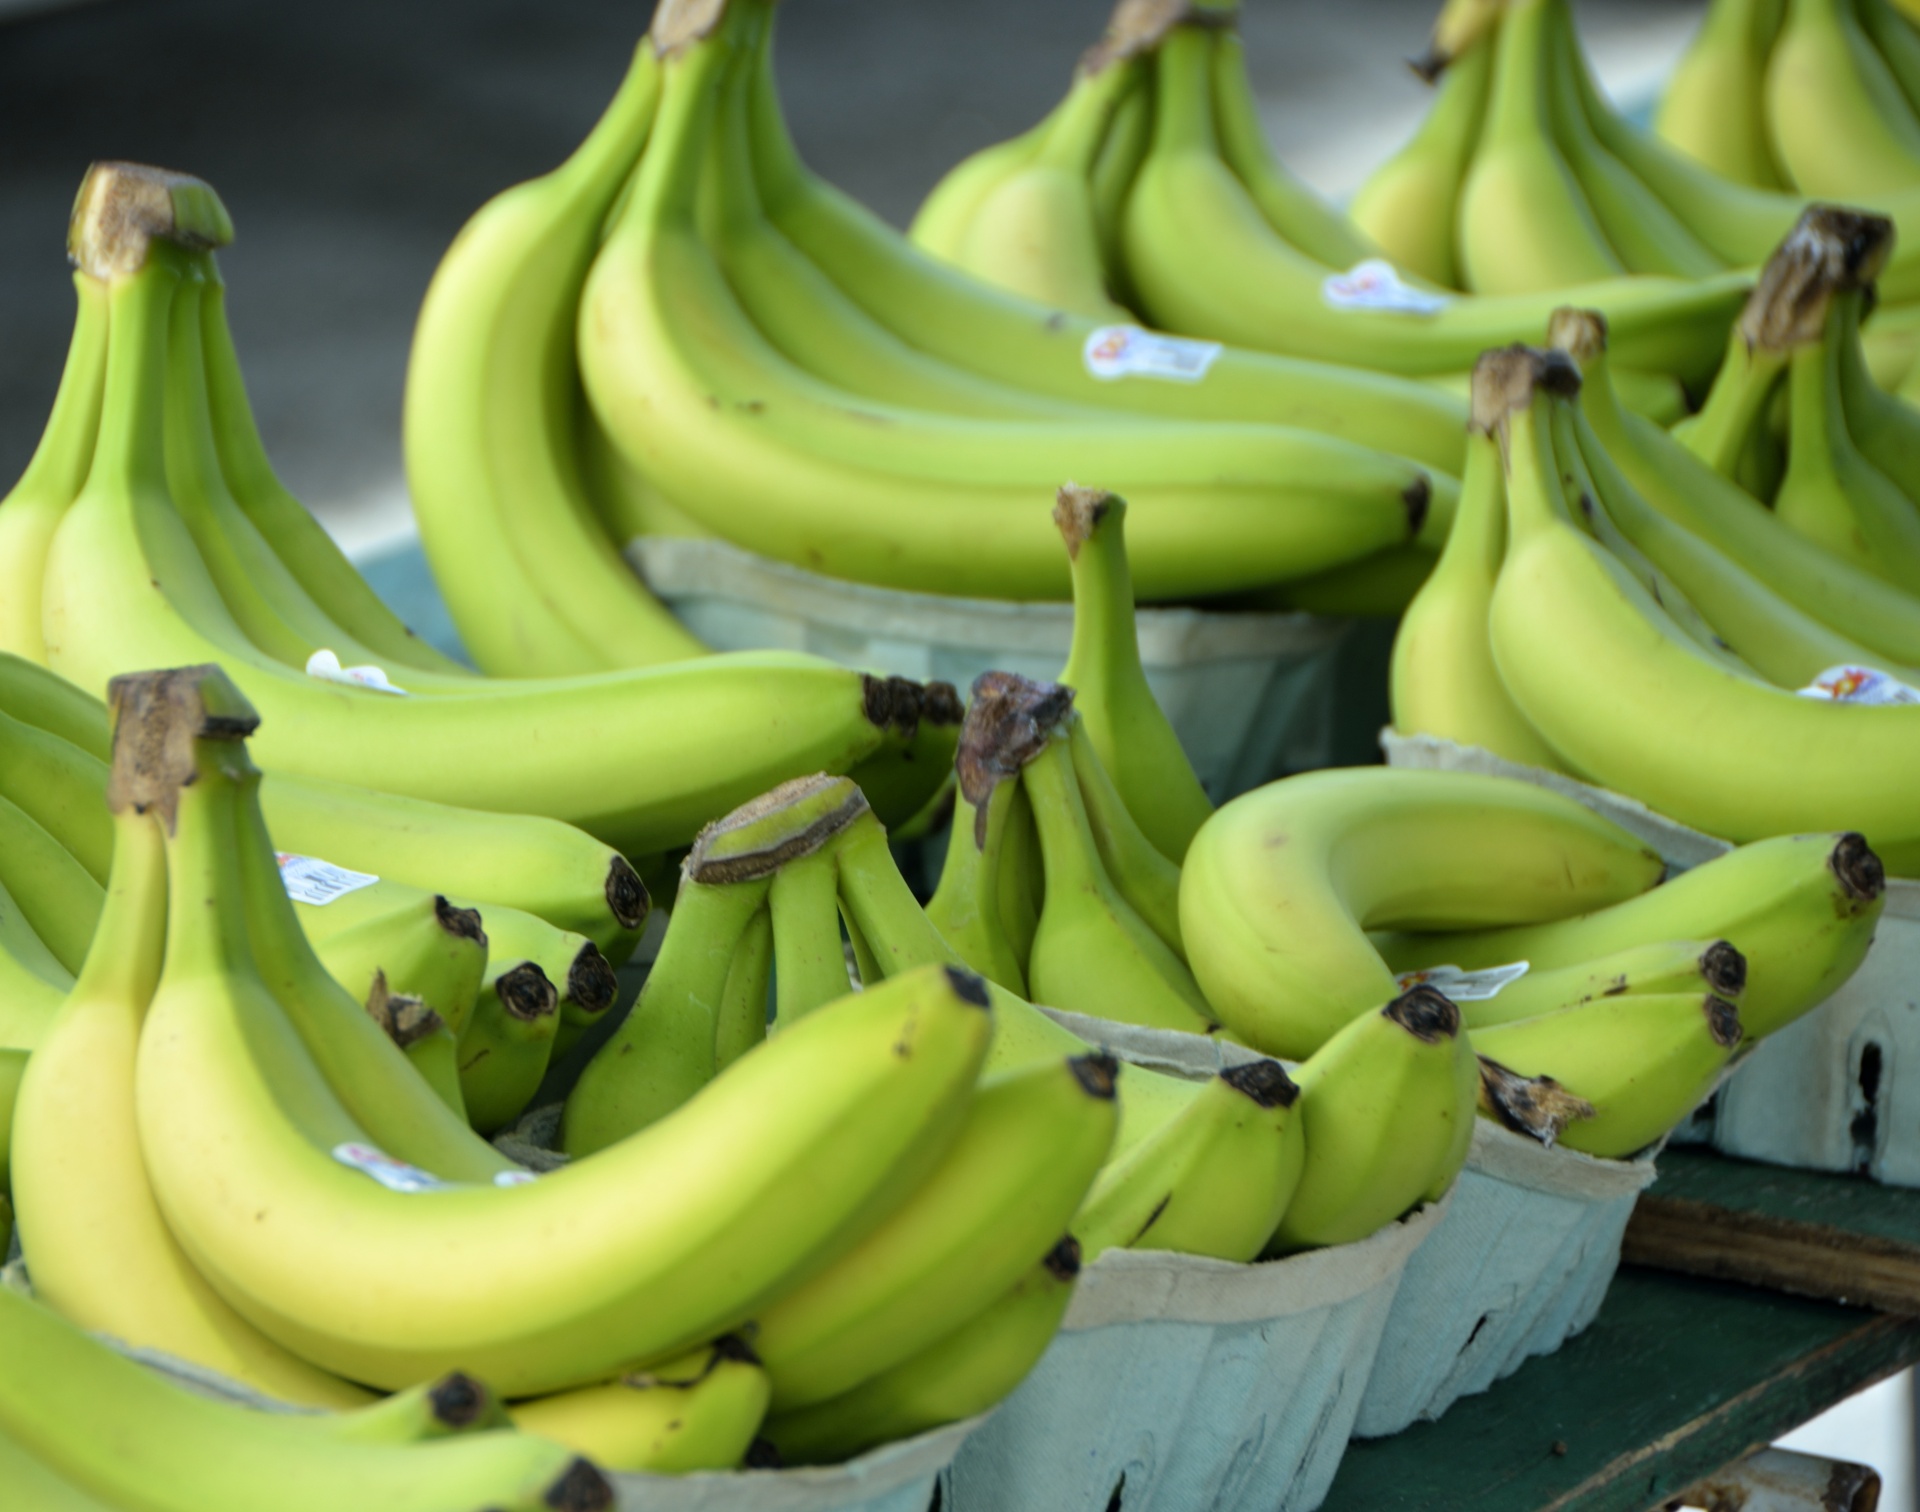 Green Bananas Background Free Stock Photo - Public Domain Pictures